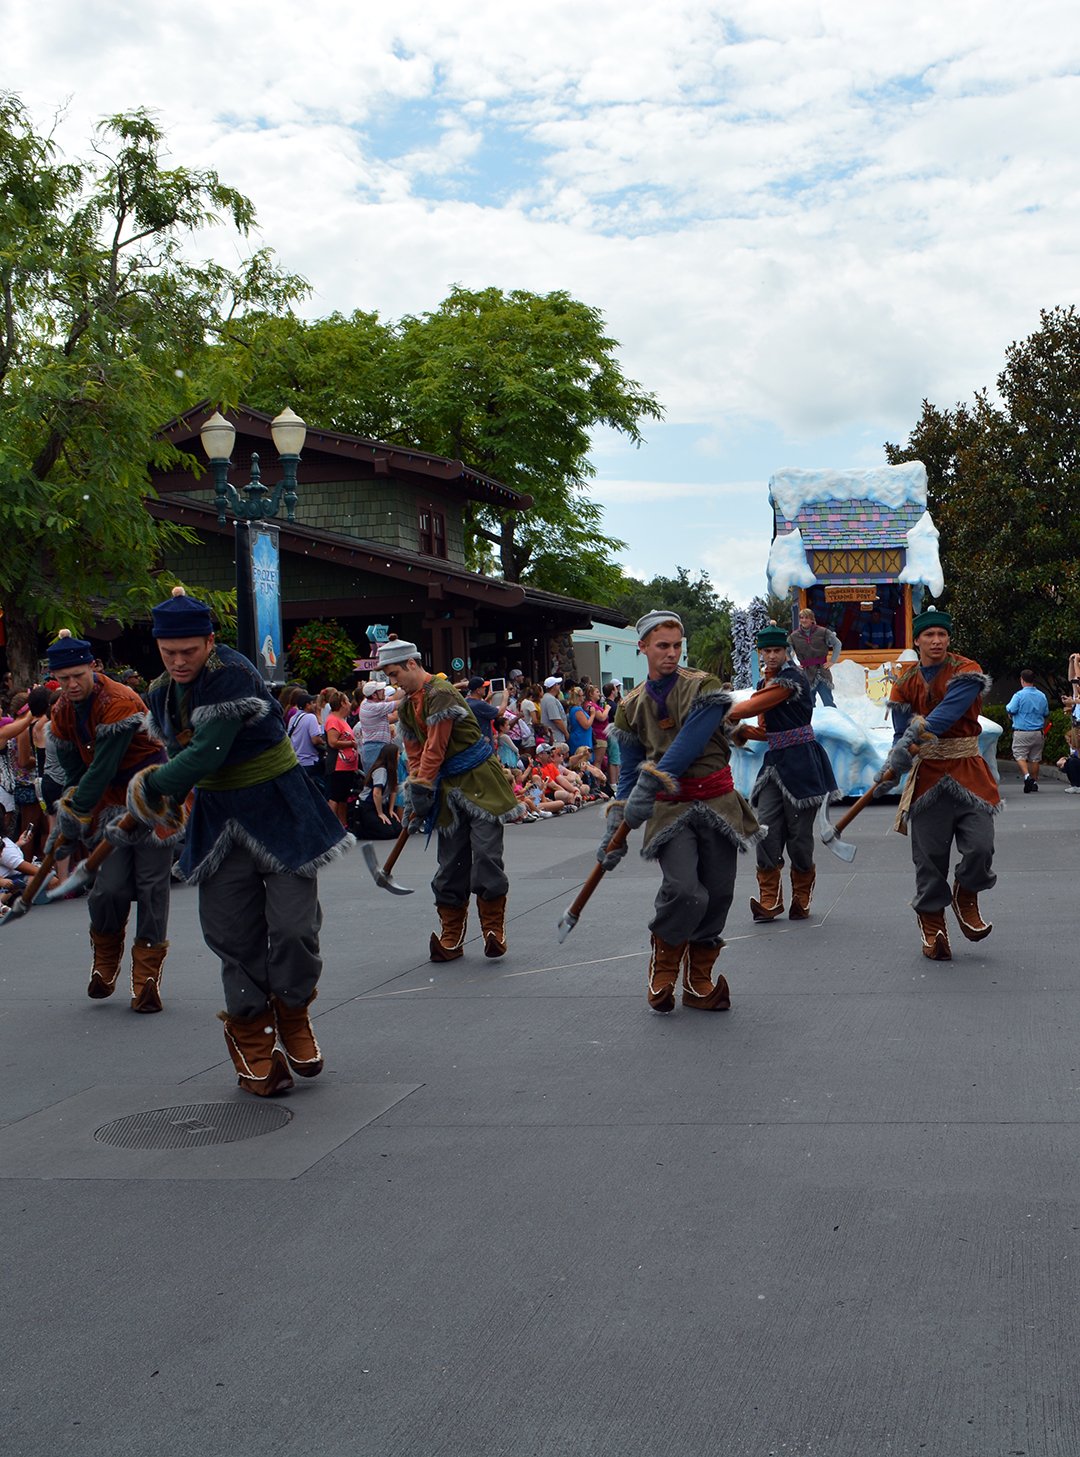 Anna and Elsa's Royal Welcome Parade featuring Kristoff at Hollwood Studios in Disney World